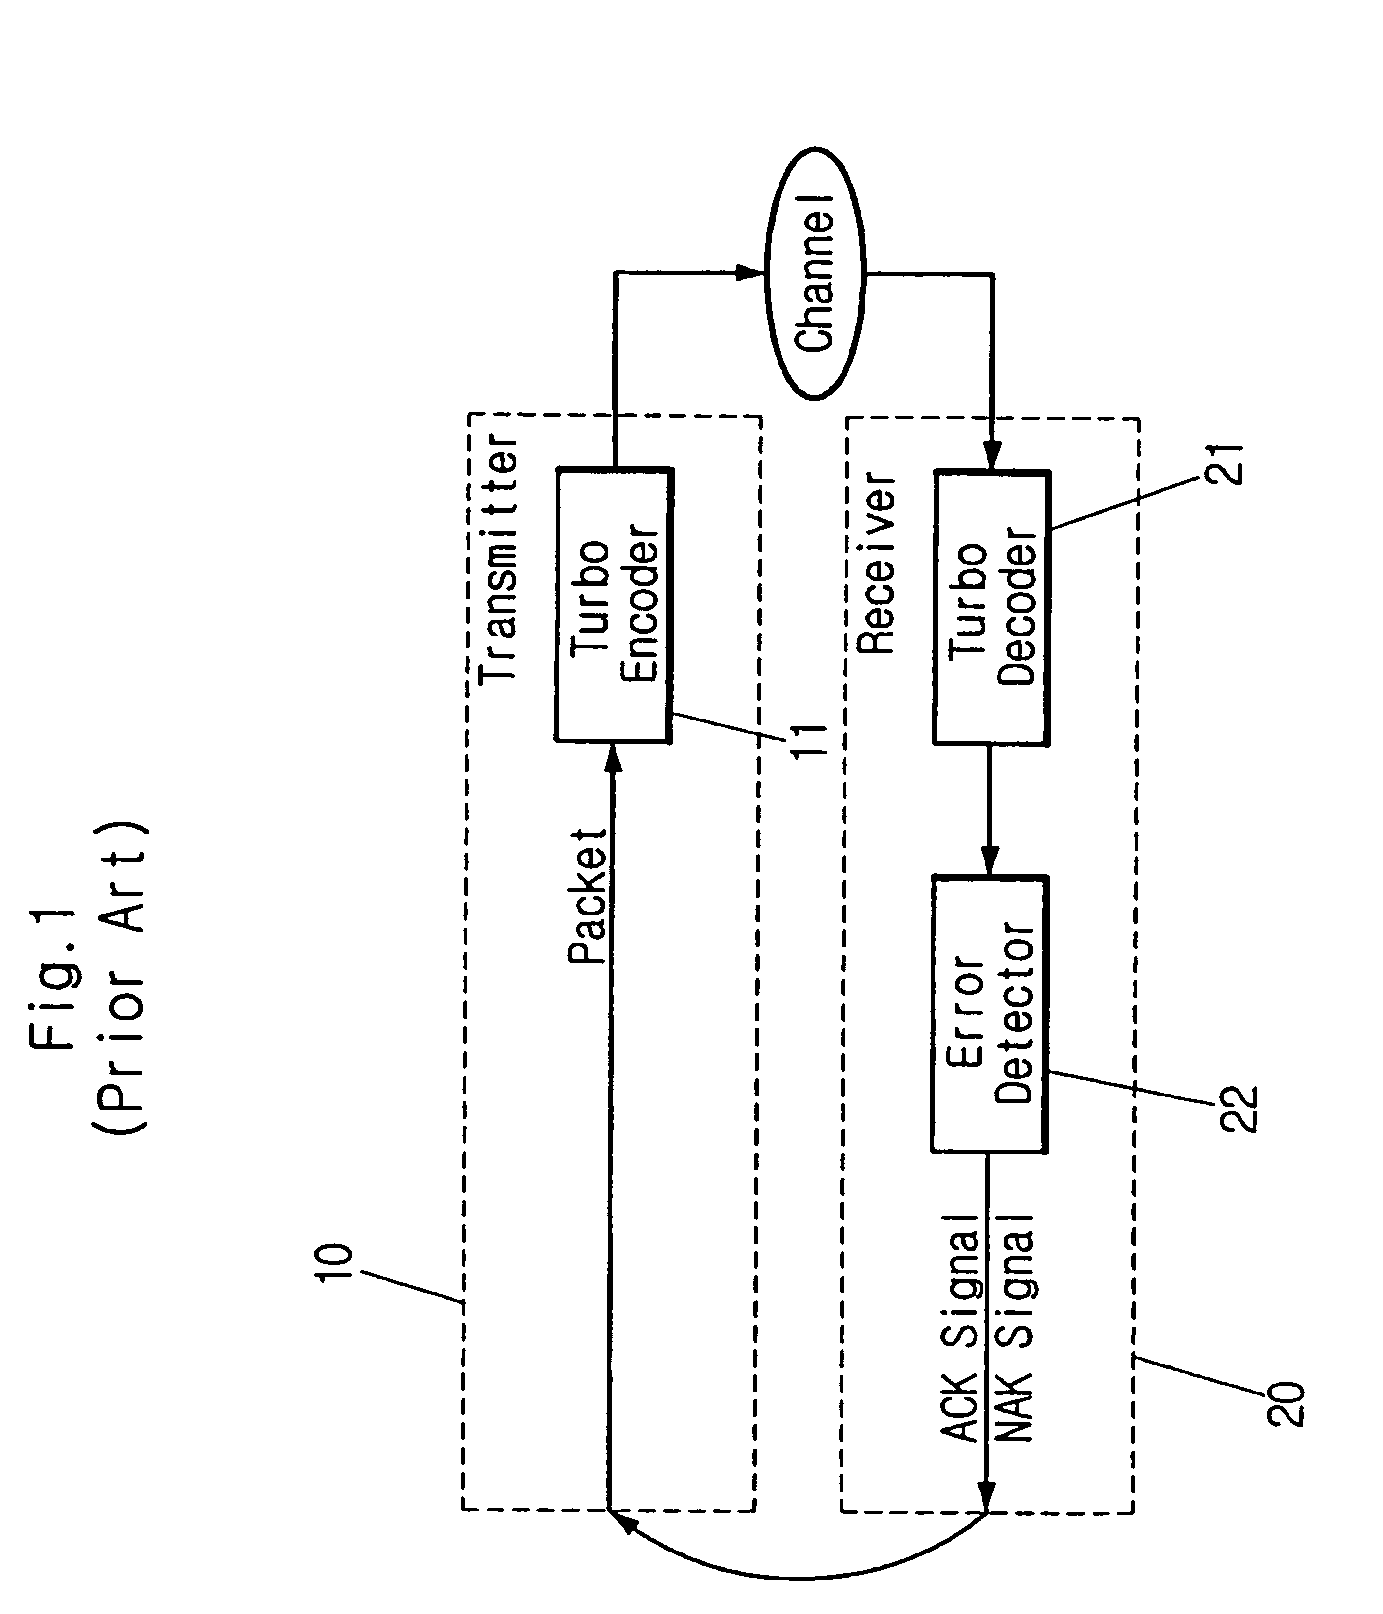 Turbo encoded hybrid automatic repeat request system and error detection method